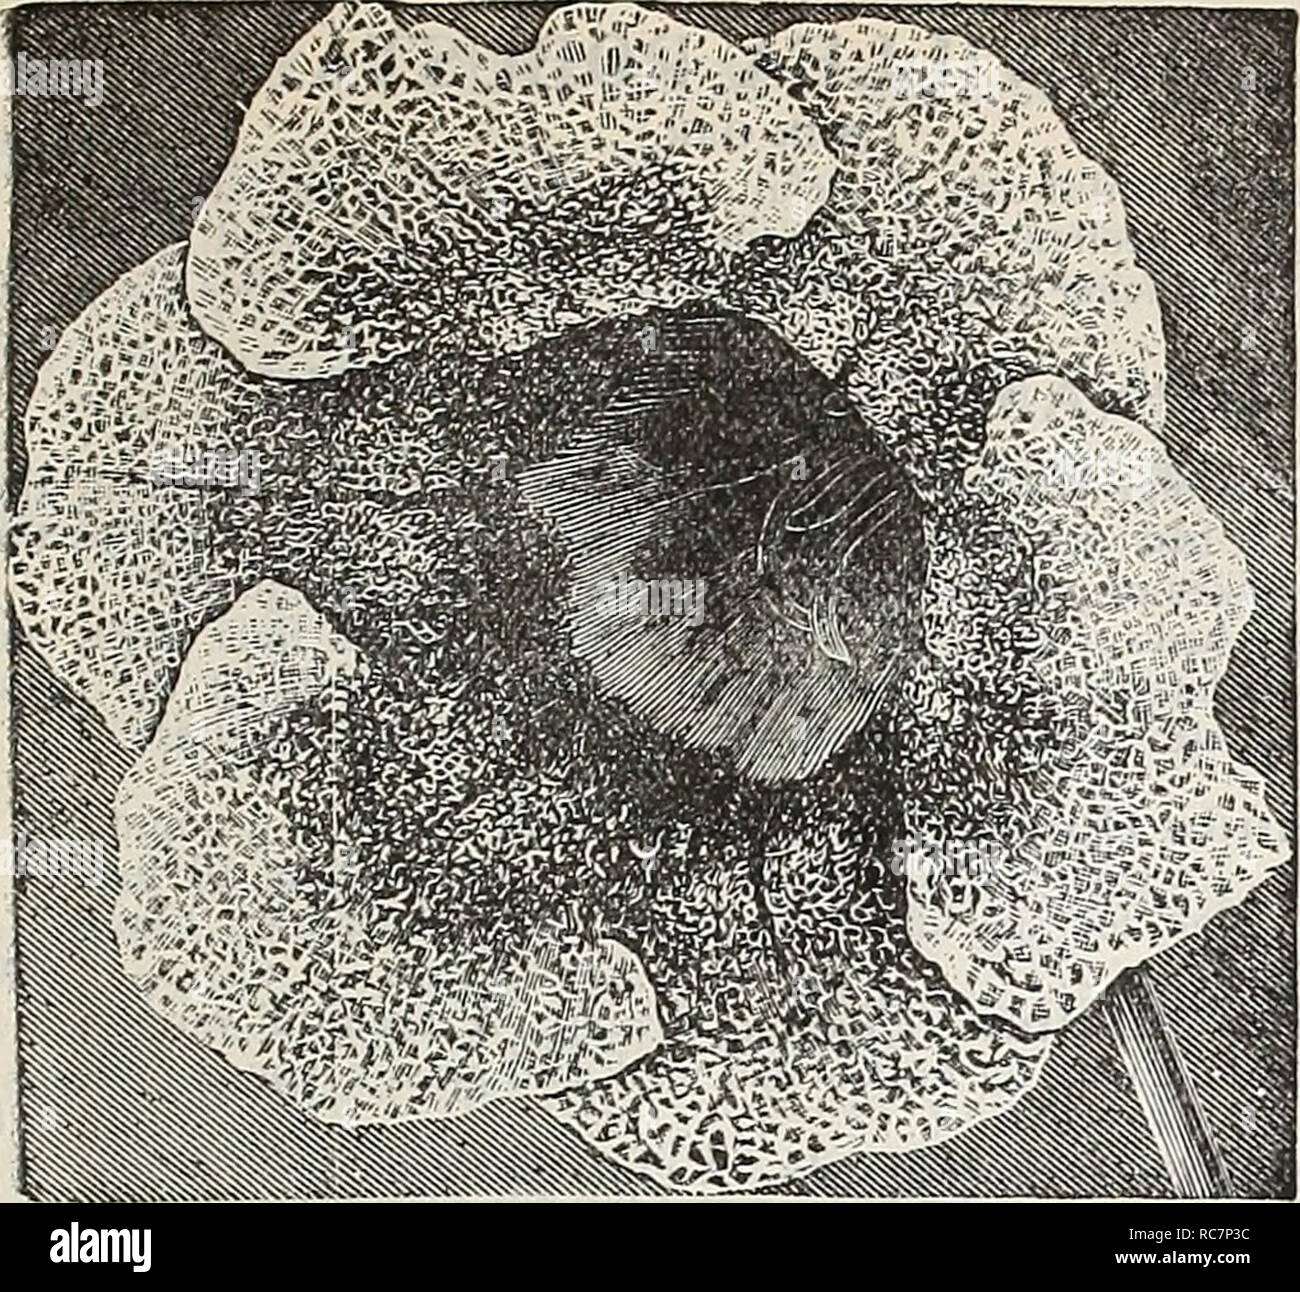 . Dreer's garden calendar : 1898. Seeds Catalogs; Nursery stock Catalogs; Gardening Catalogs; Flowers Seeds Catalogs; Vegetables Seeds Catalogs. DREER'S RELIABLE FLOWER SEEDS. 71. Gloxinia Hybrida Punctaia. GI.OBB AMARANTH. (Gomphrena.) Popularly known as &quot; Bachelor's Buttons,&quot; a first-rate bedding plant; flowers can be dried and used in winter bouquets. PER PKT. S896 Globe Amaranth, NpiiaConii&gt;acta. Red, 1 foot. (See cut.) 5 5900 Mixed. 2 feet. Per oz. 40 cts 5 G1VAPHAI.IUM. (Edelweiss.) Principally found on the Alps of Switzerland. Seed must be sown early in the spring in shallo Stock Photo